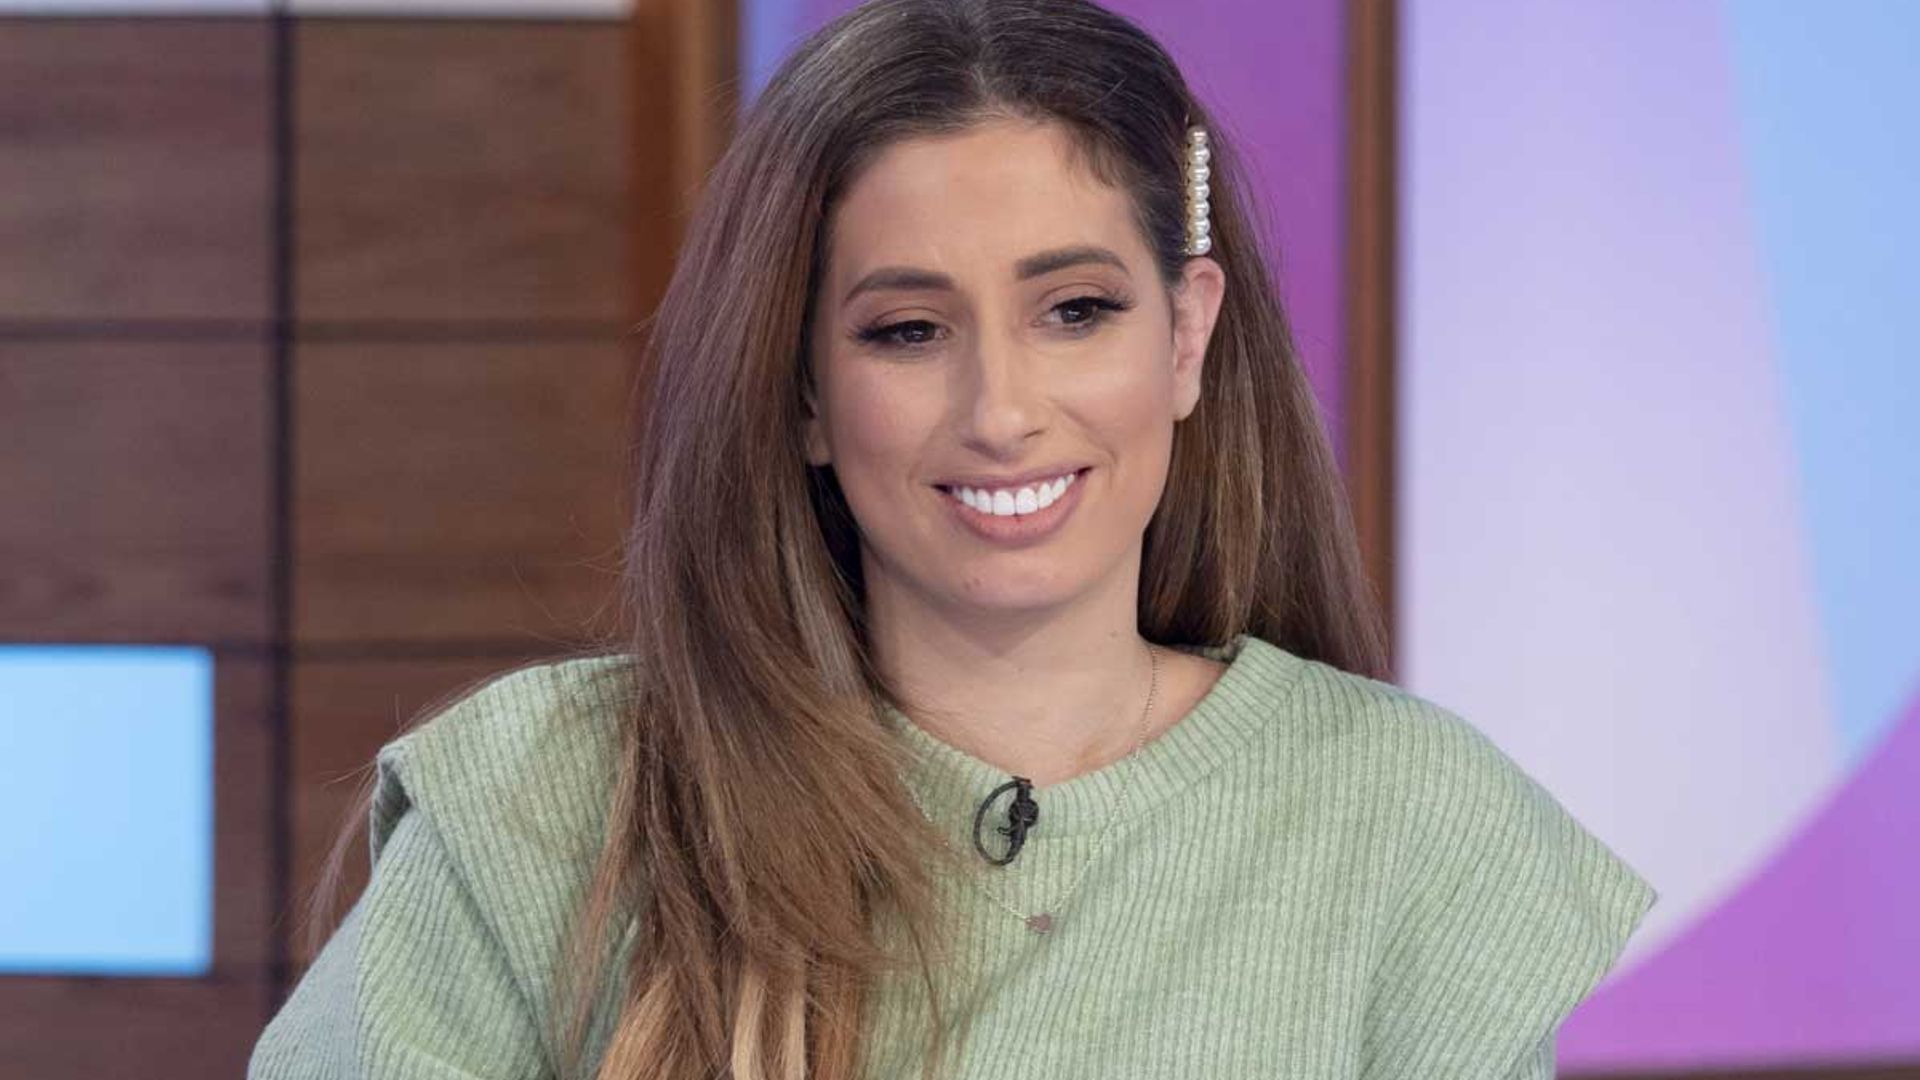 Stacey Solomons £20 Jumper Dress She Wore On Loose Women Is From 